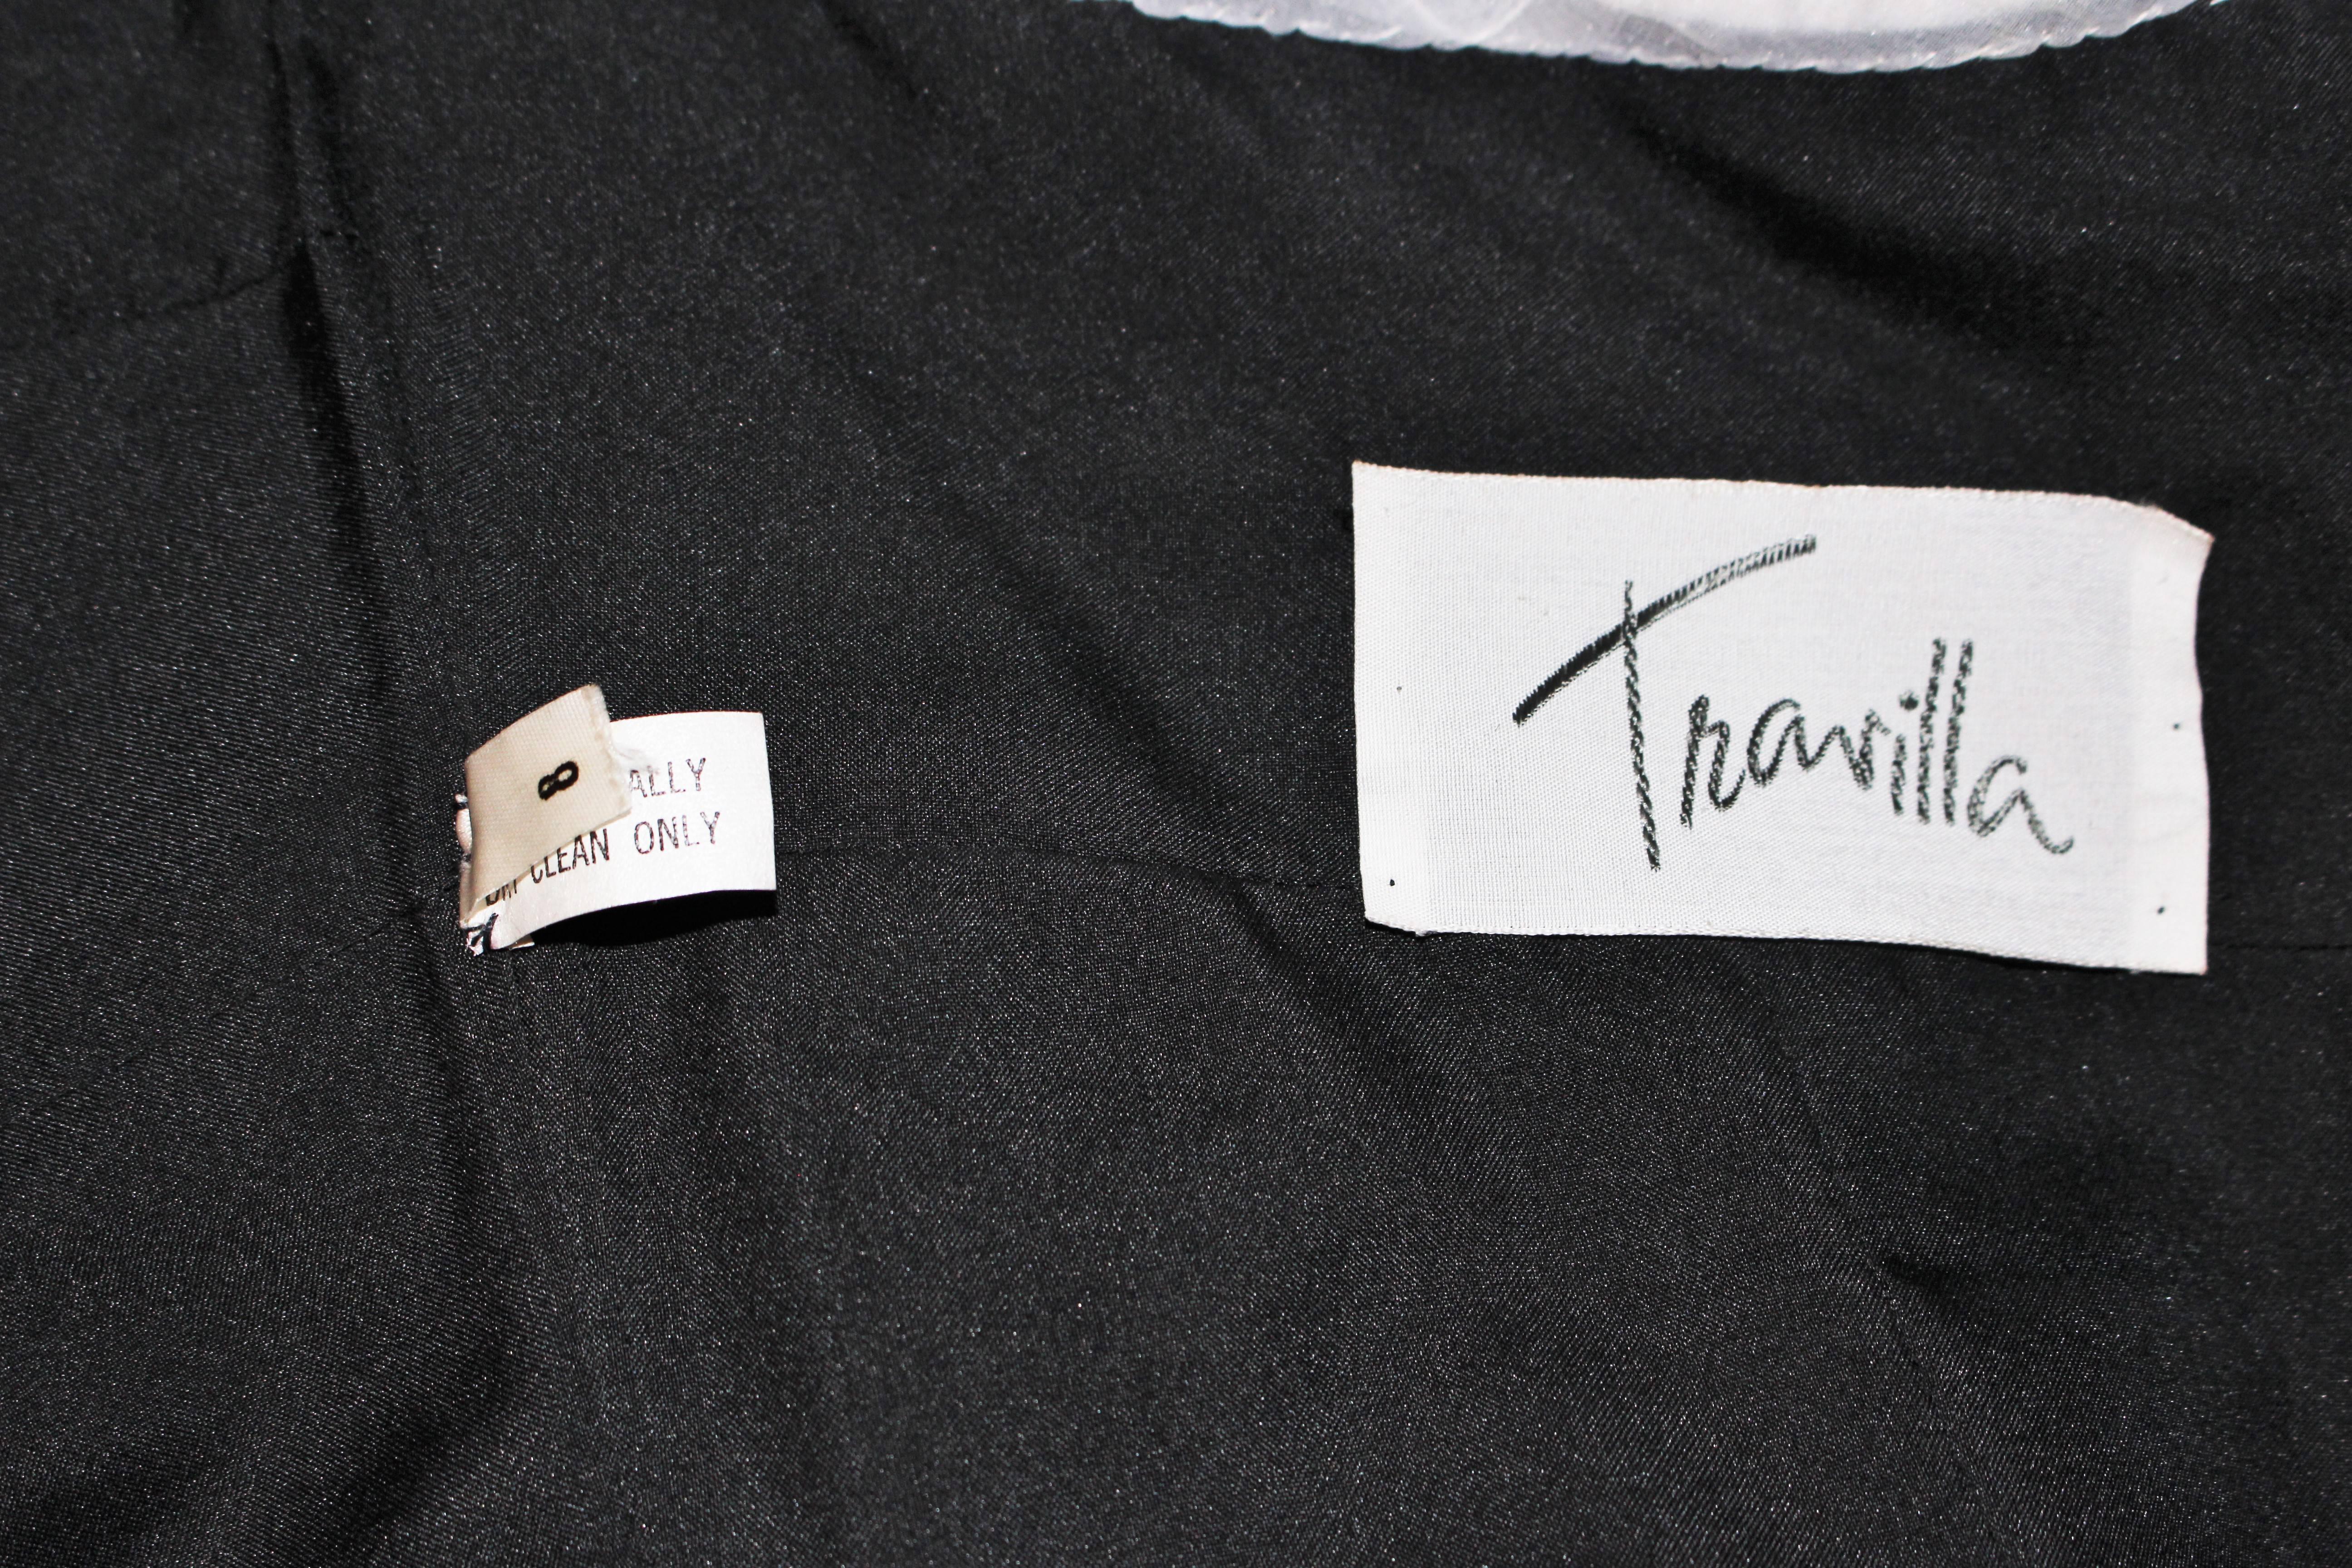 TRAVILLA Black Denim Cocktail Dress with Jacket and White Stitching Size 8 - 10 For Sale 3